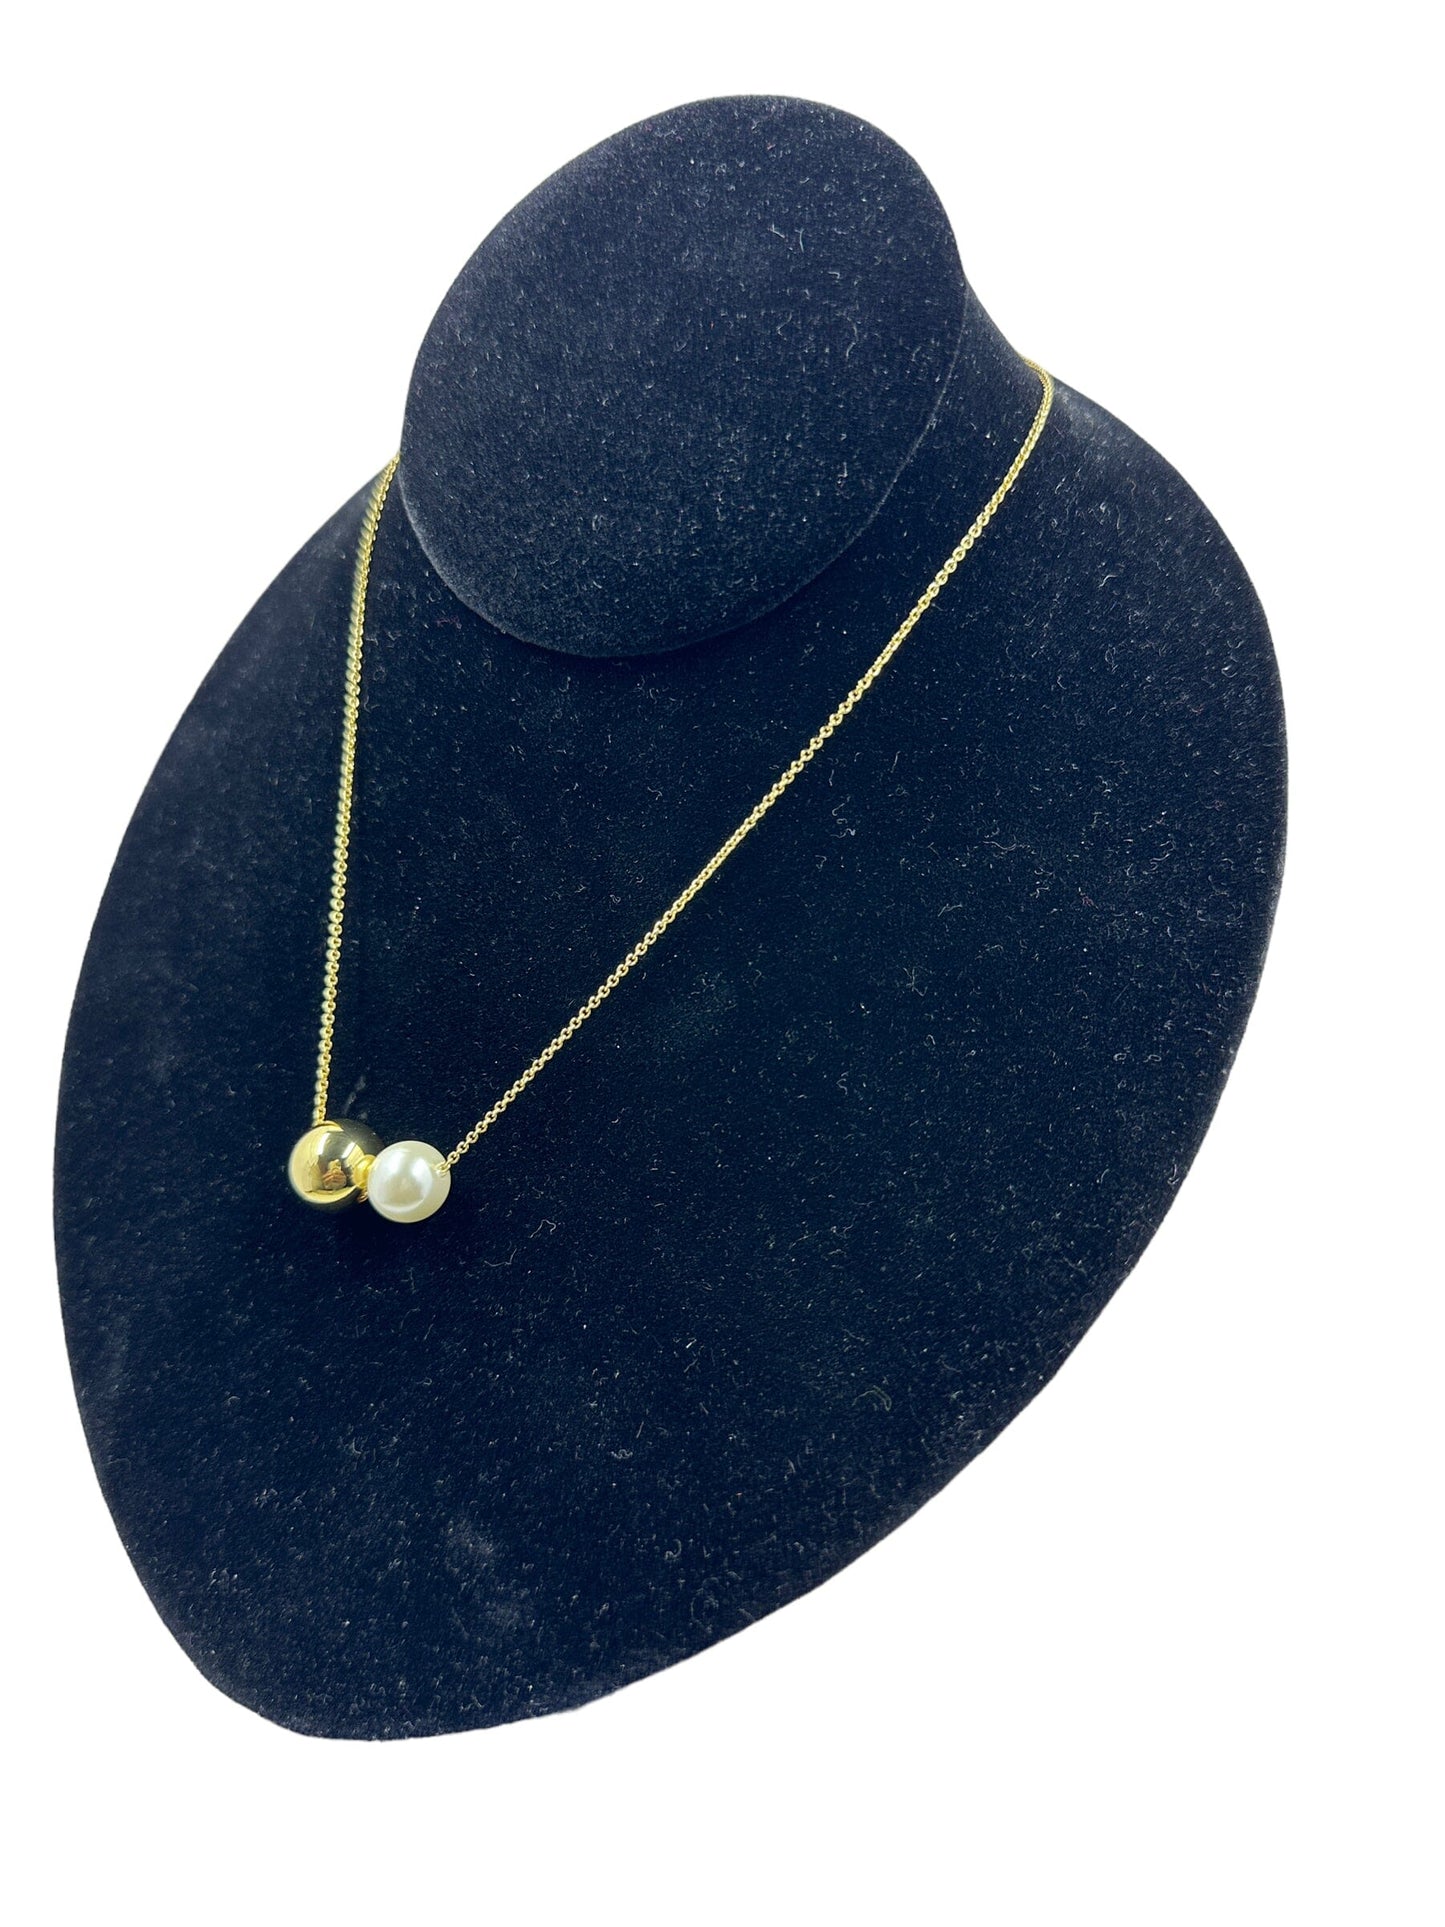 Carrie Pearl Strung Gold Ball Necklace Necklaces Trendzio Jewelry 